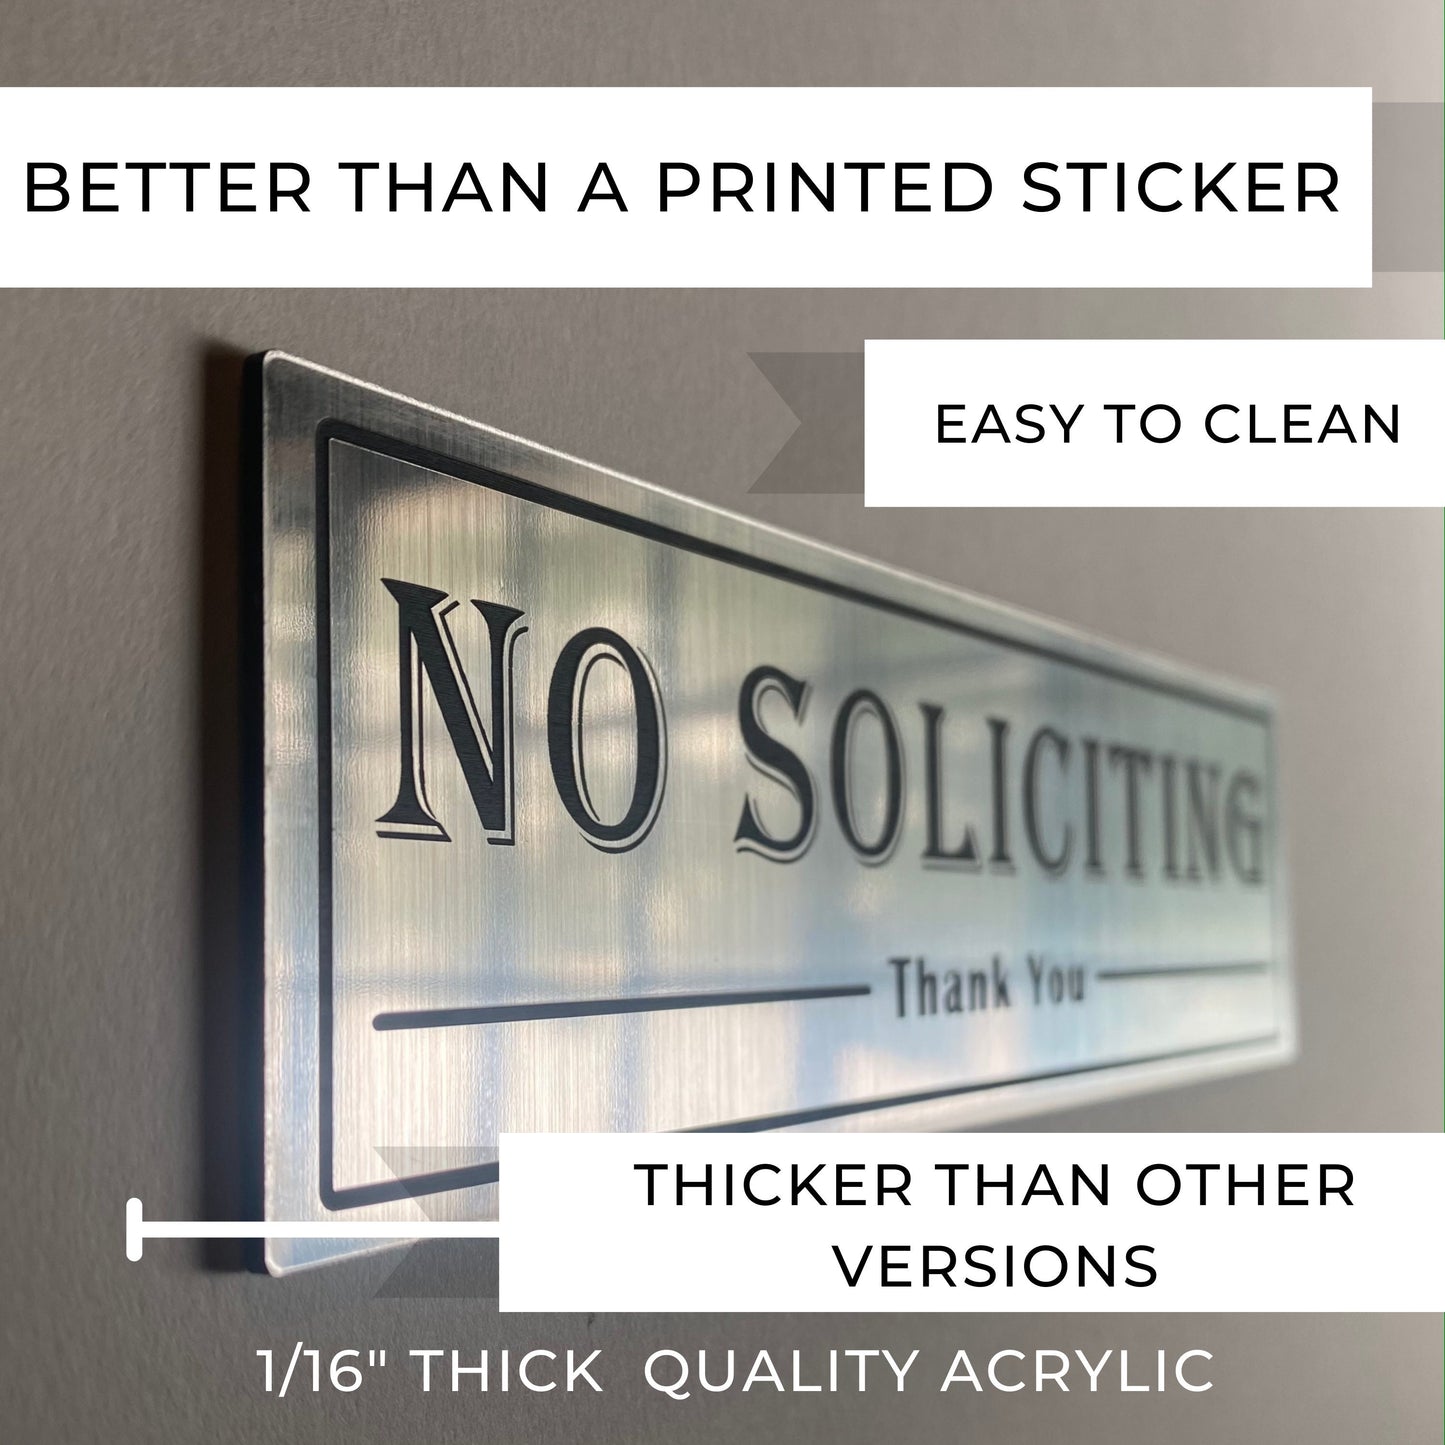 No Soliciting sign for Home or Business | Laser Engraved Acrylic | UV Stable & Weatherproof | 7x2x5" | Porch Door Sign Do Not Disturb